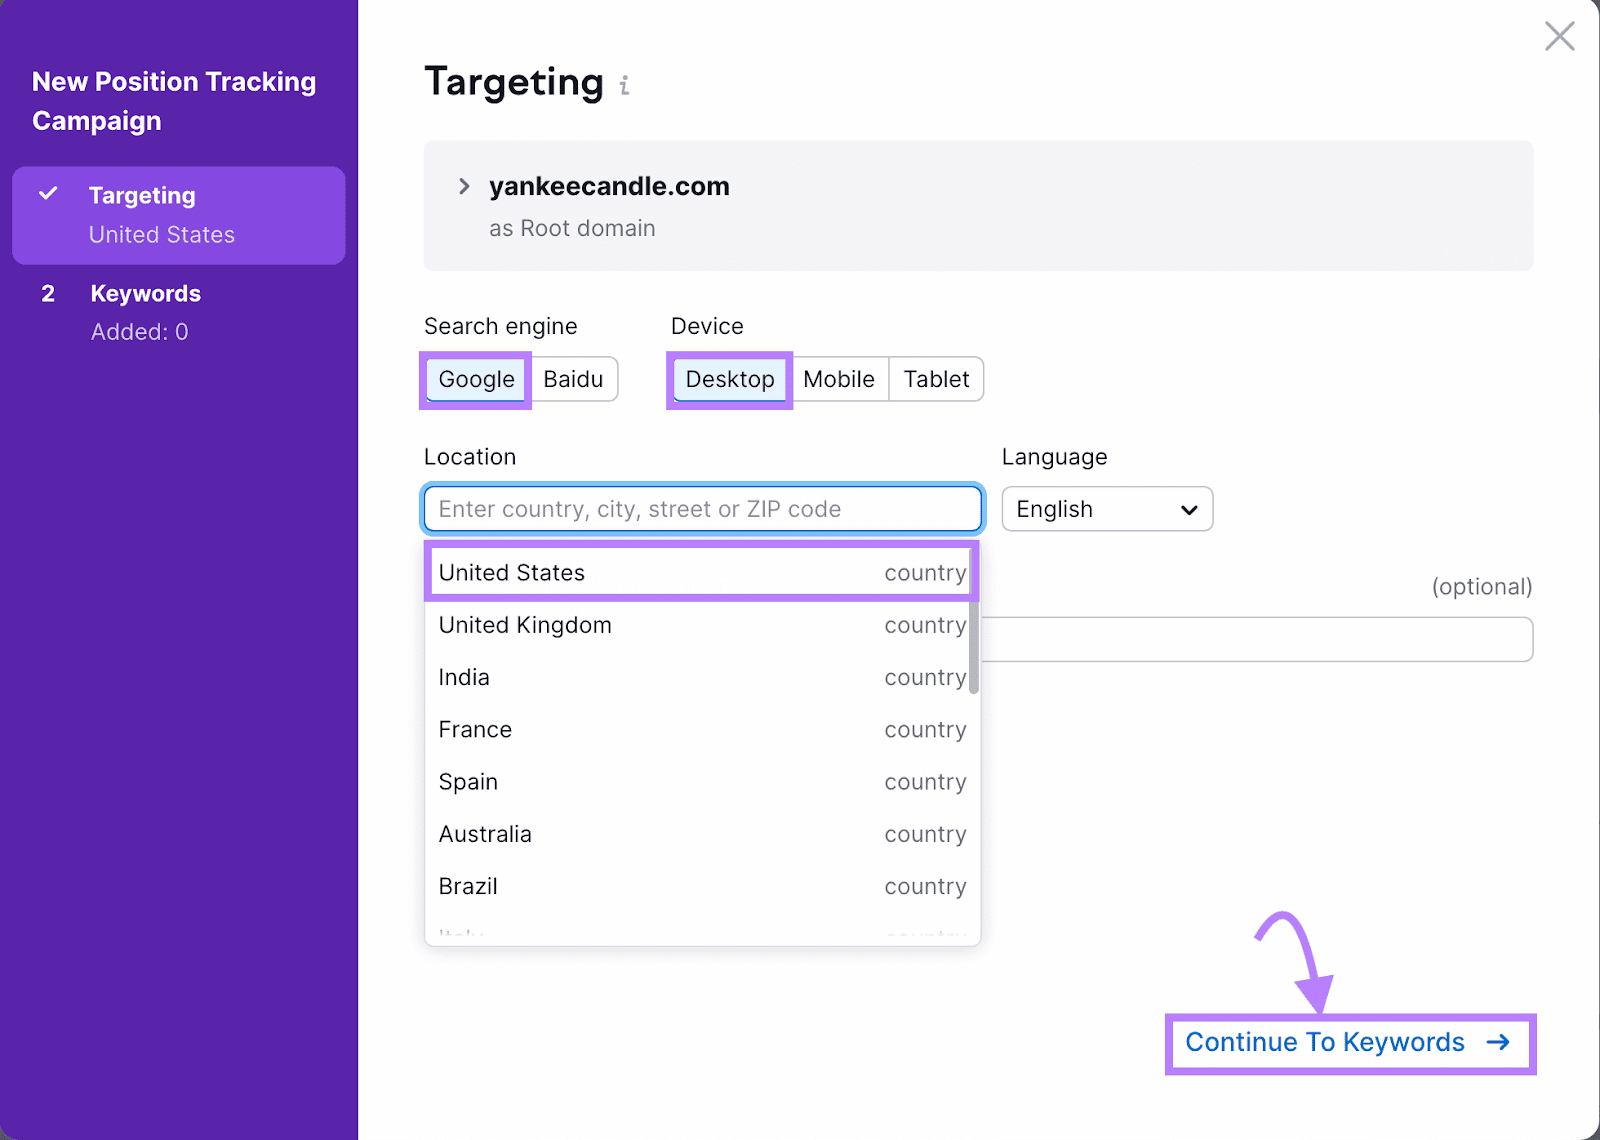 "Targeting" screen of Position Tracking settings